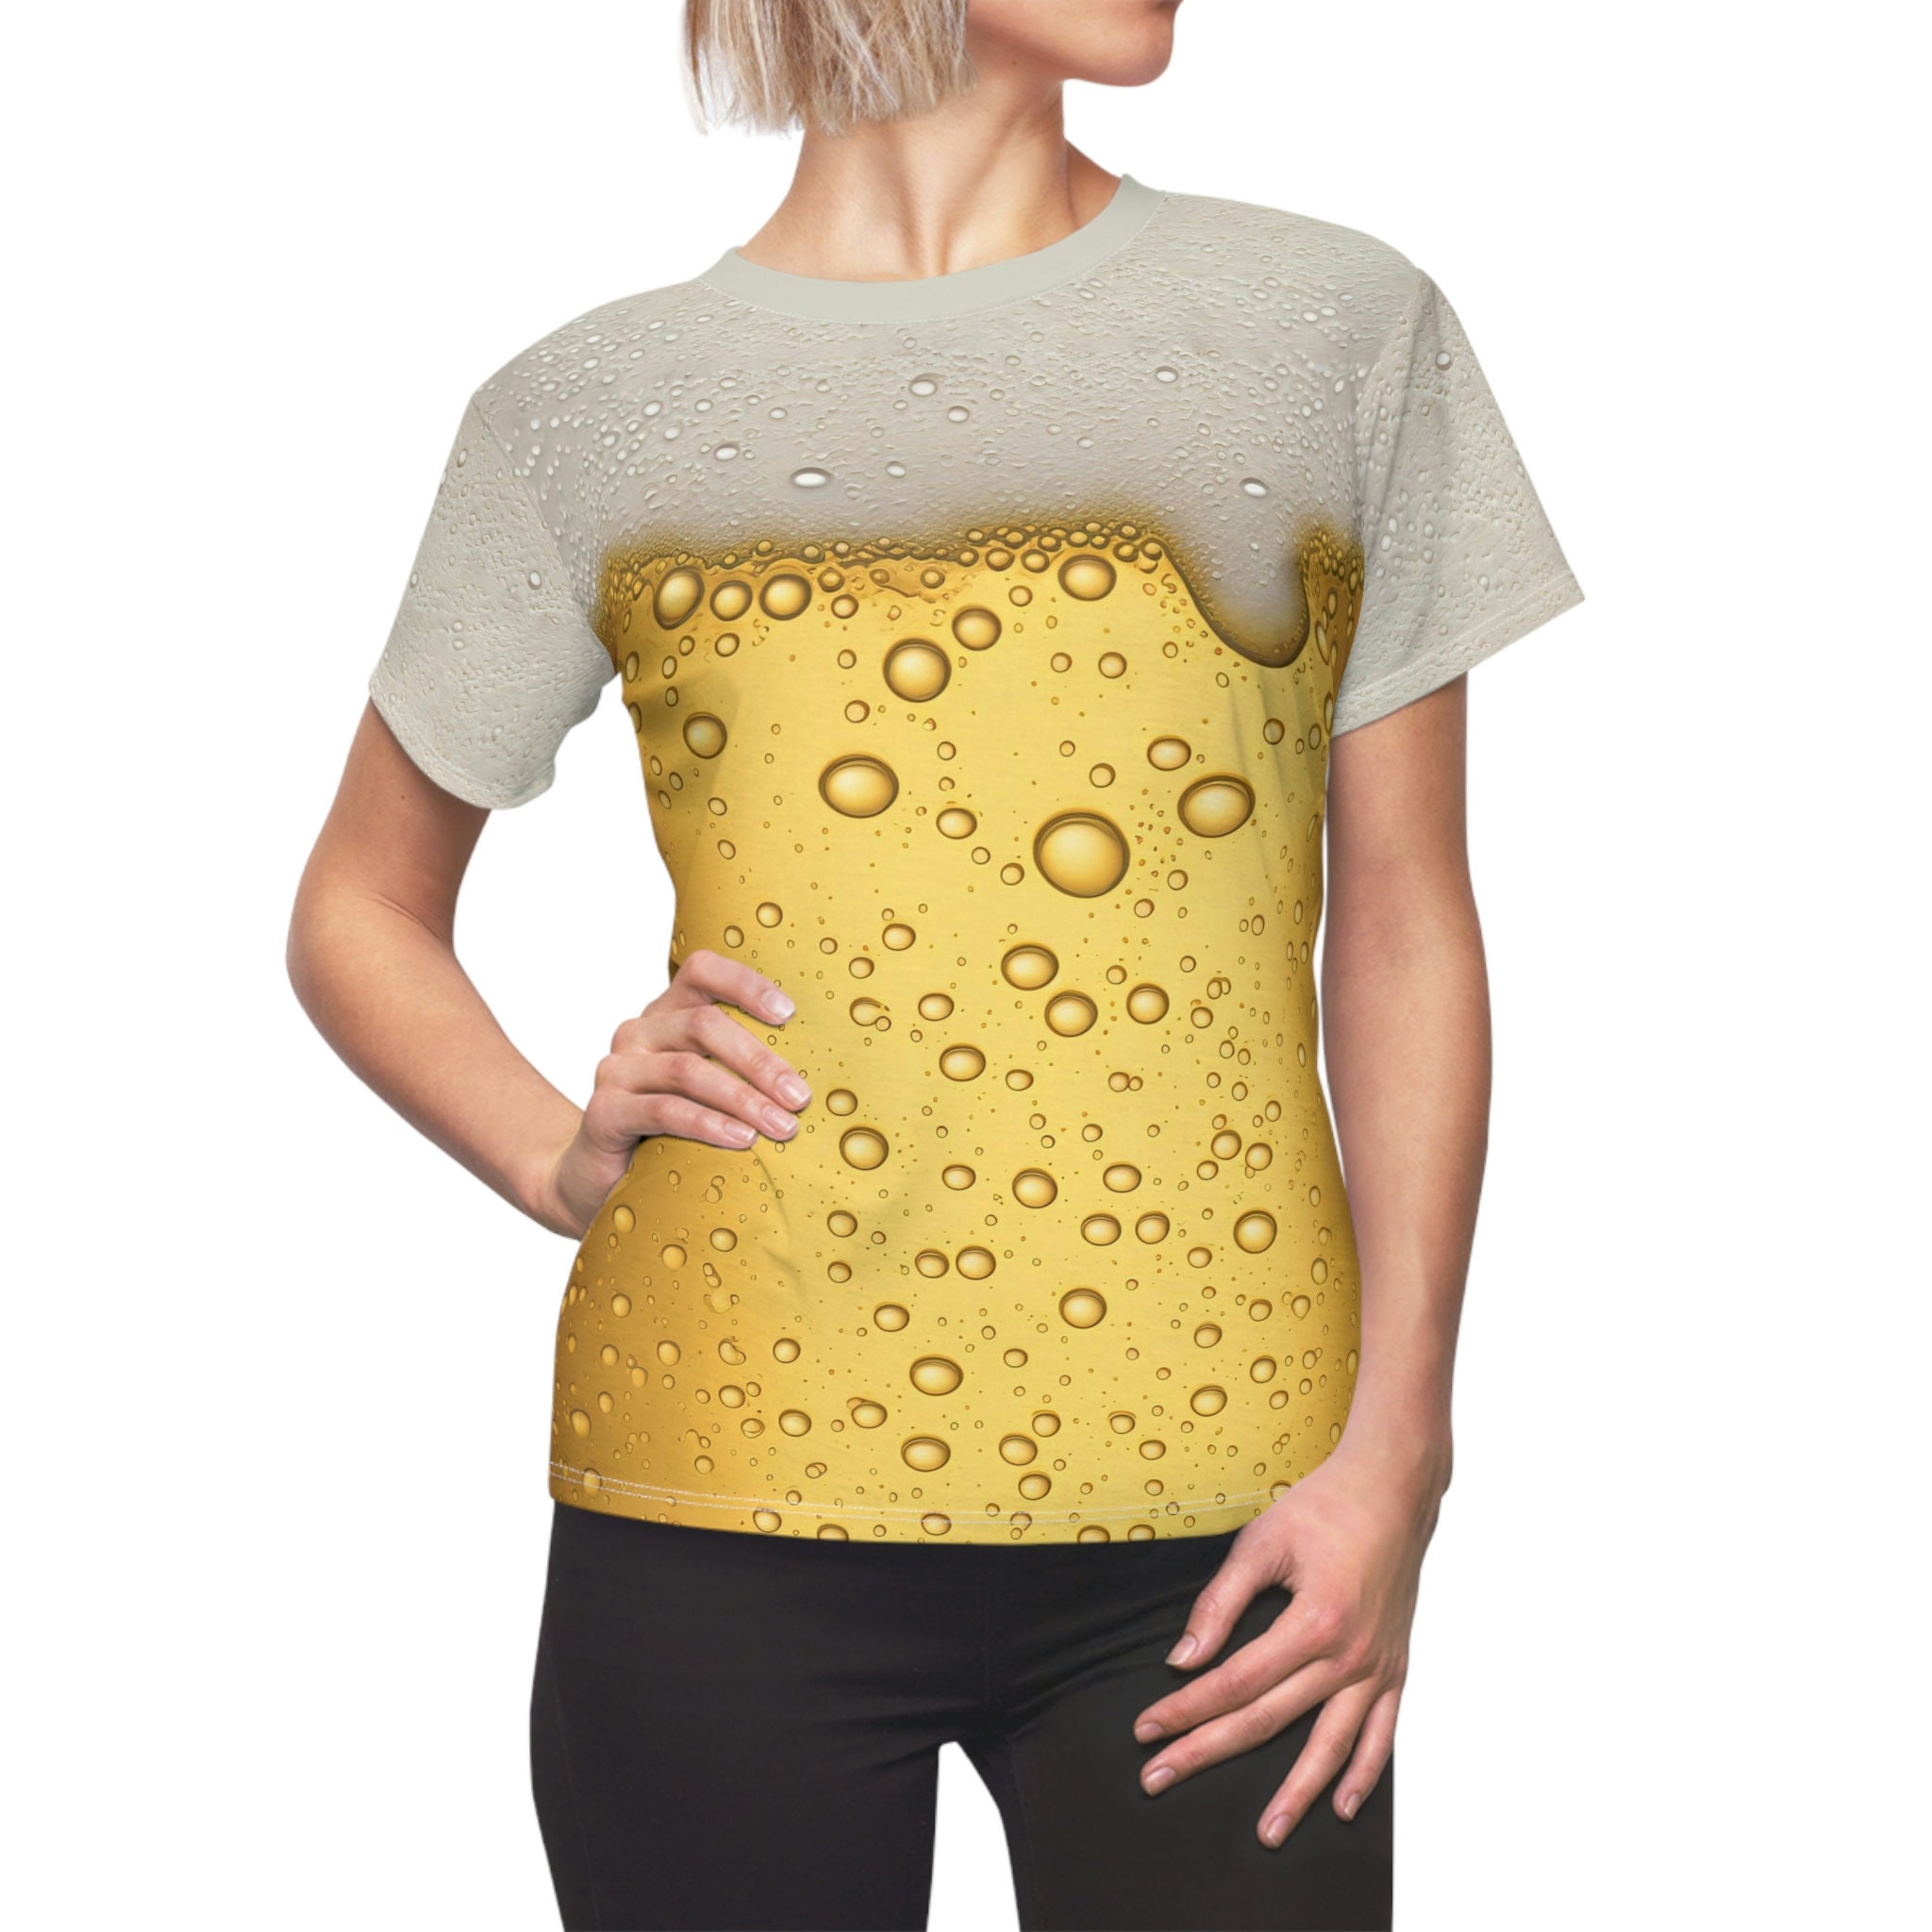 Discover Beer Run Funny Costume T-Shirt Maglietta Stampa 3D